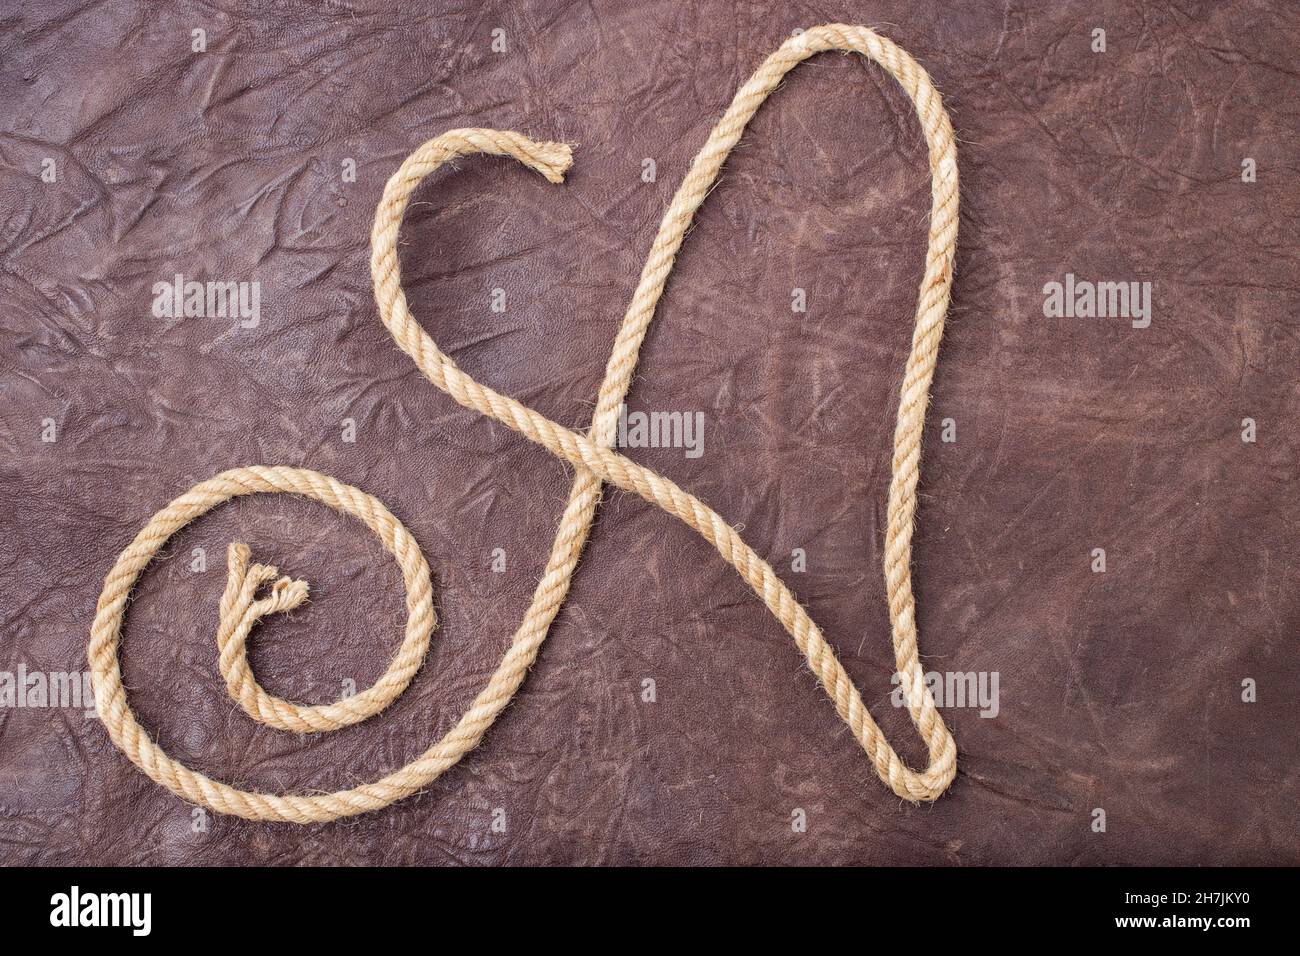 Capital letter A written with jute rope, on textured natural leather Stock Photo